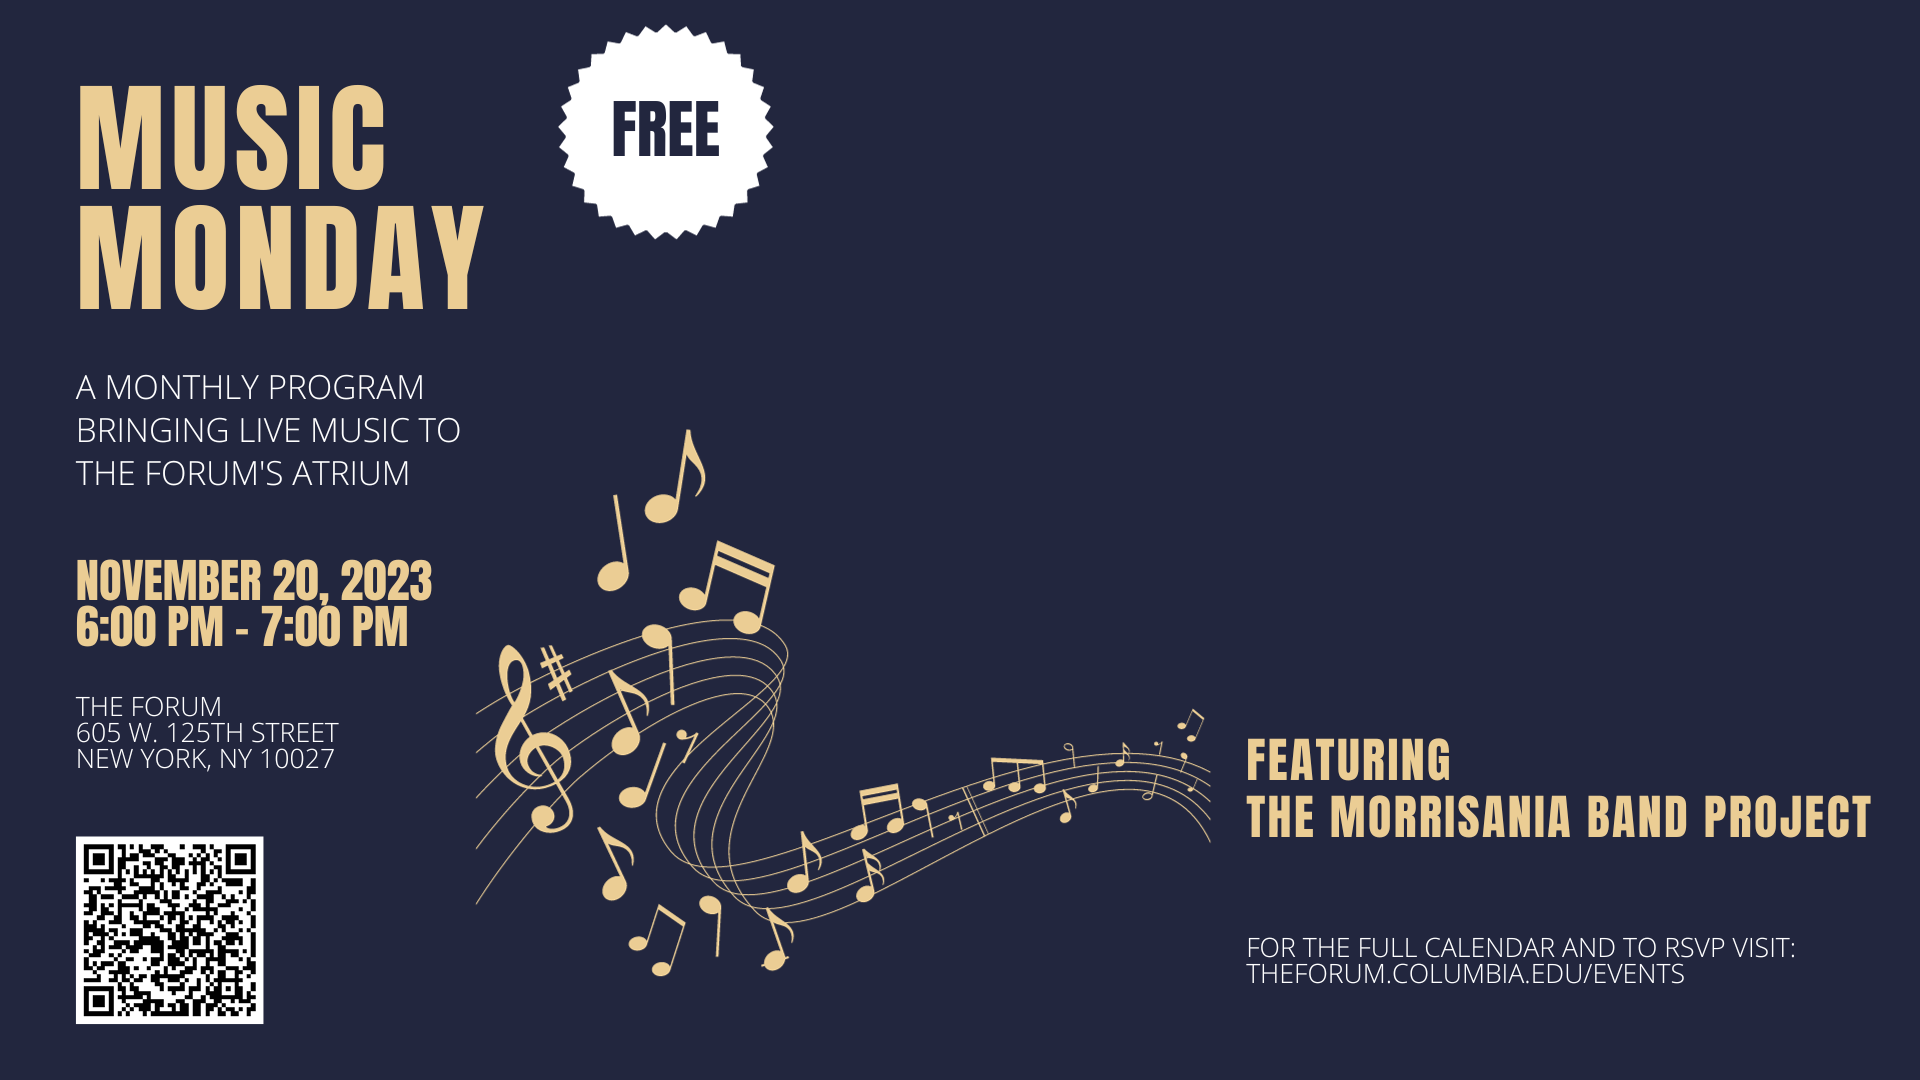 Music Monday flyer for November 20 event with Morrisania Band Project